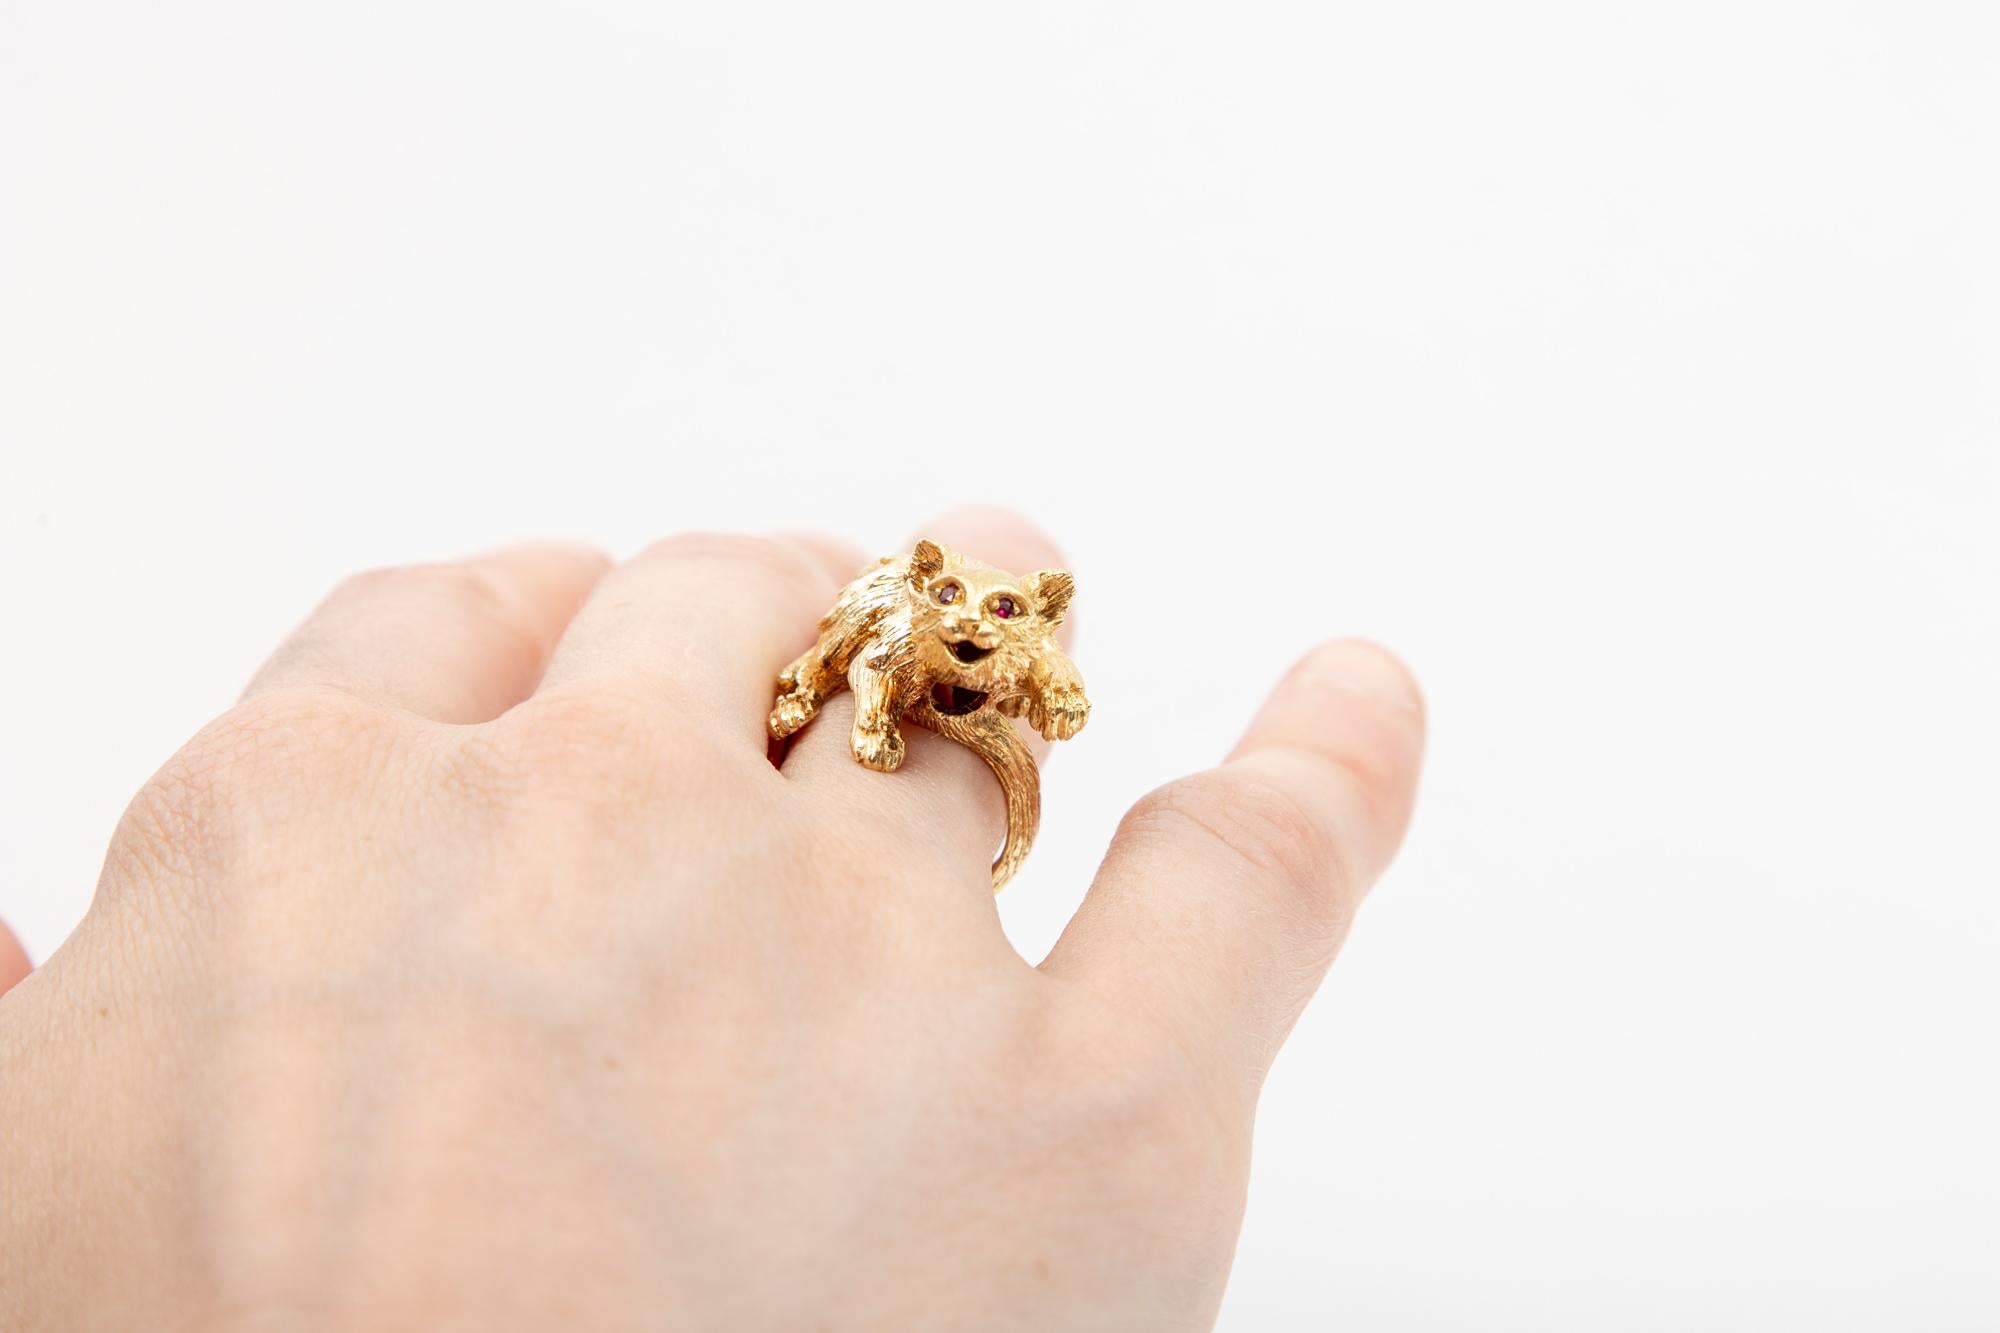 18k Yellow Gold Textured Figural Kitten Ring For Sale 7